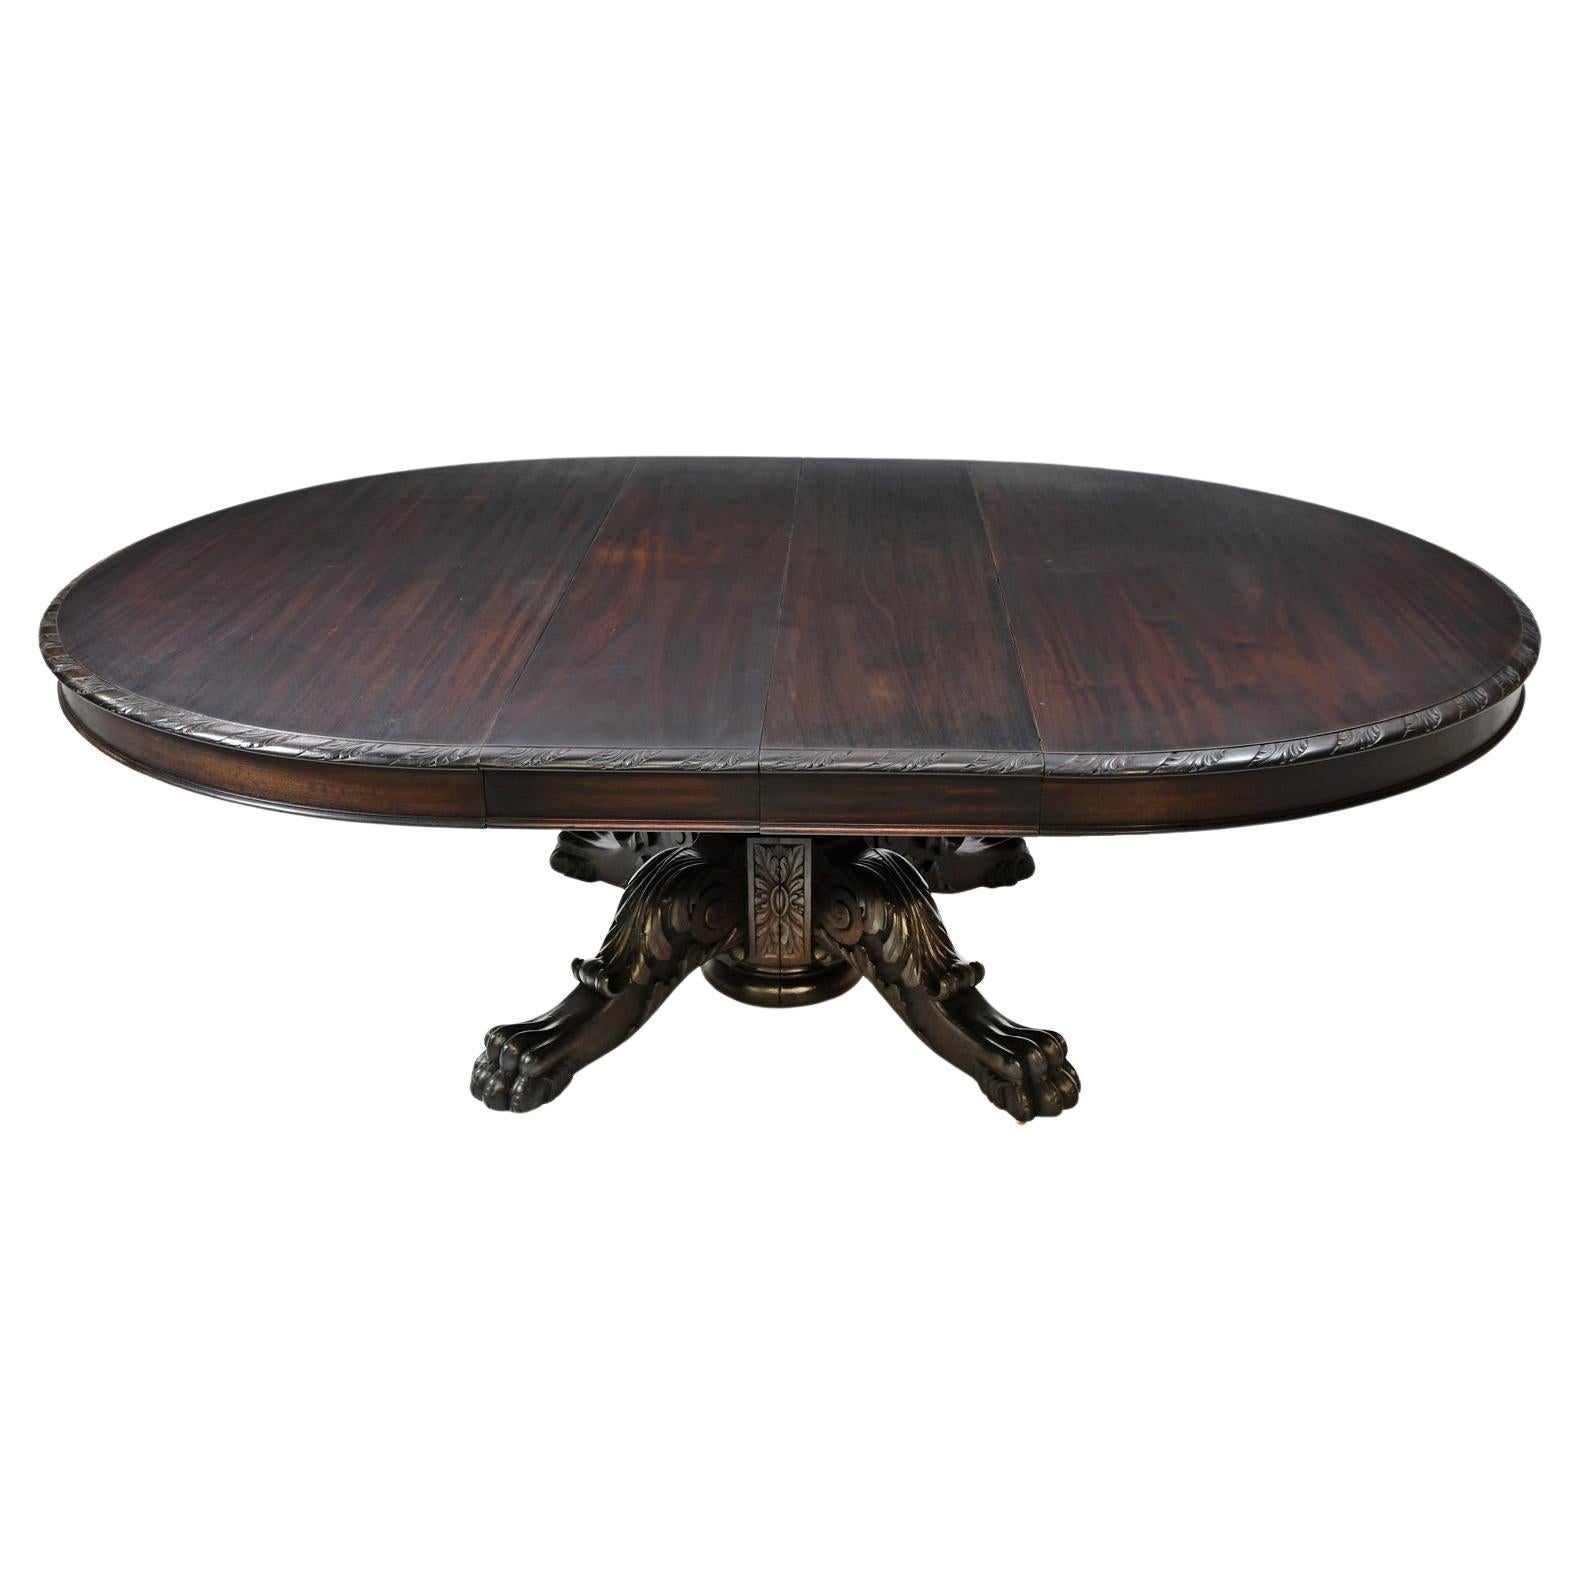 66" Round Extension Dining Table with Center Pedestal Opening to 12', c. 1880 For Sale